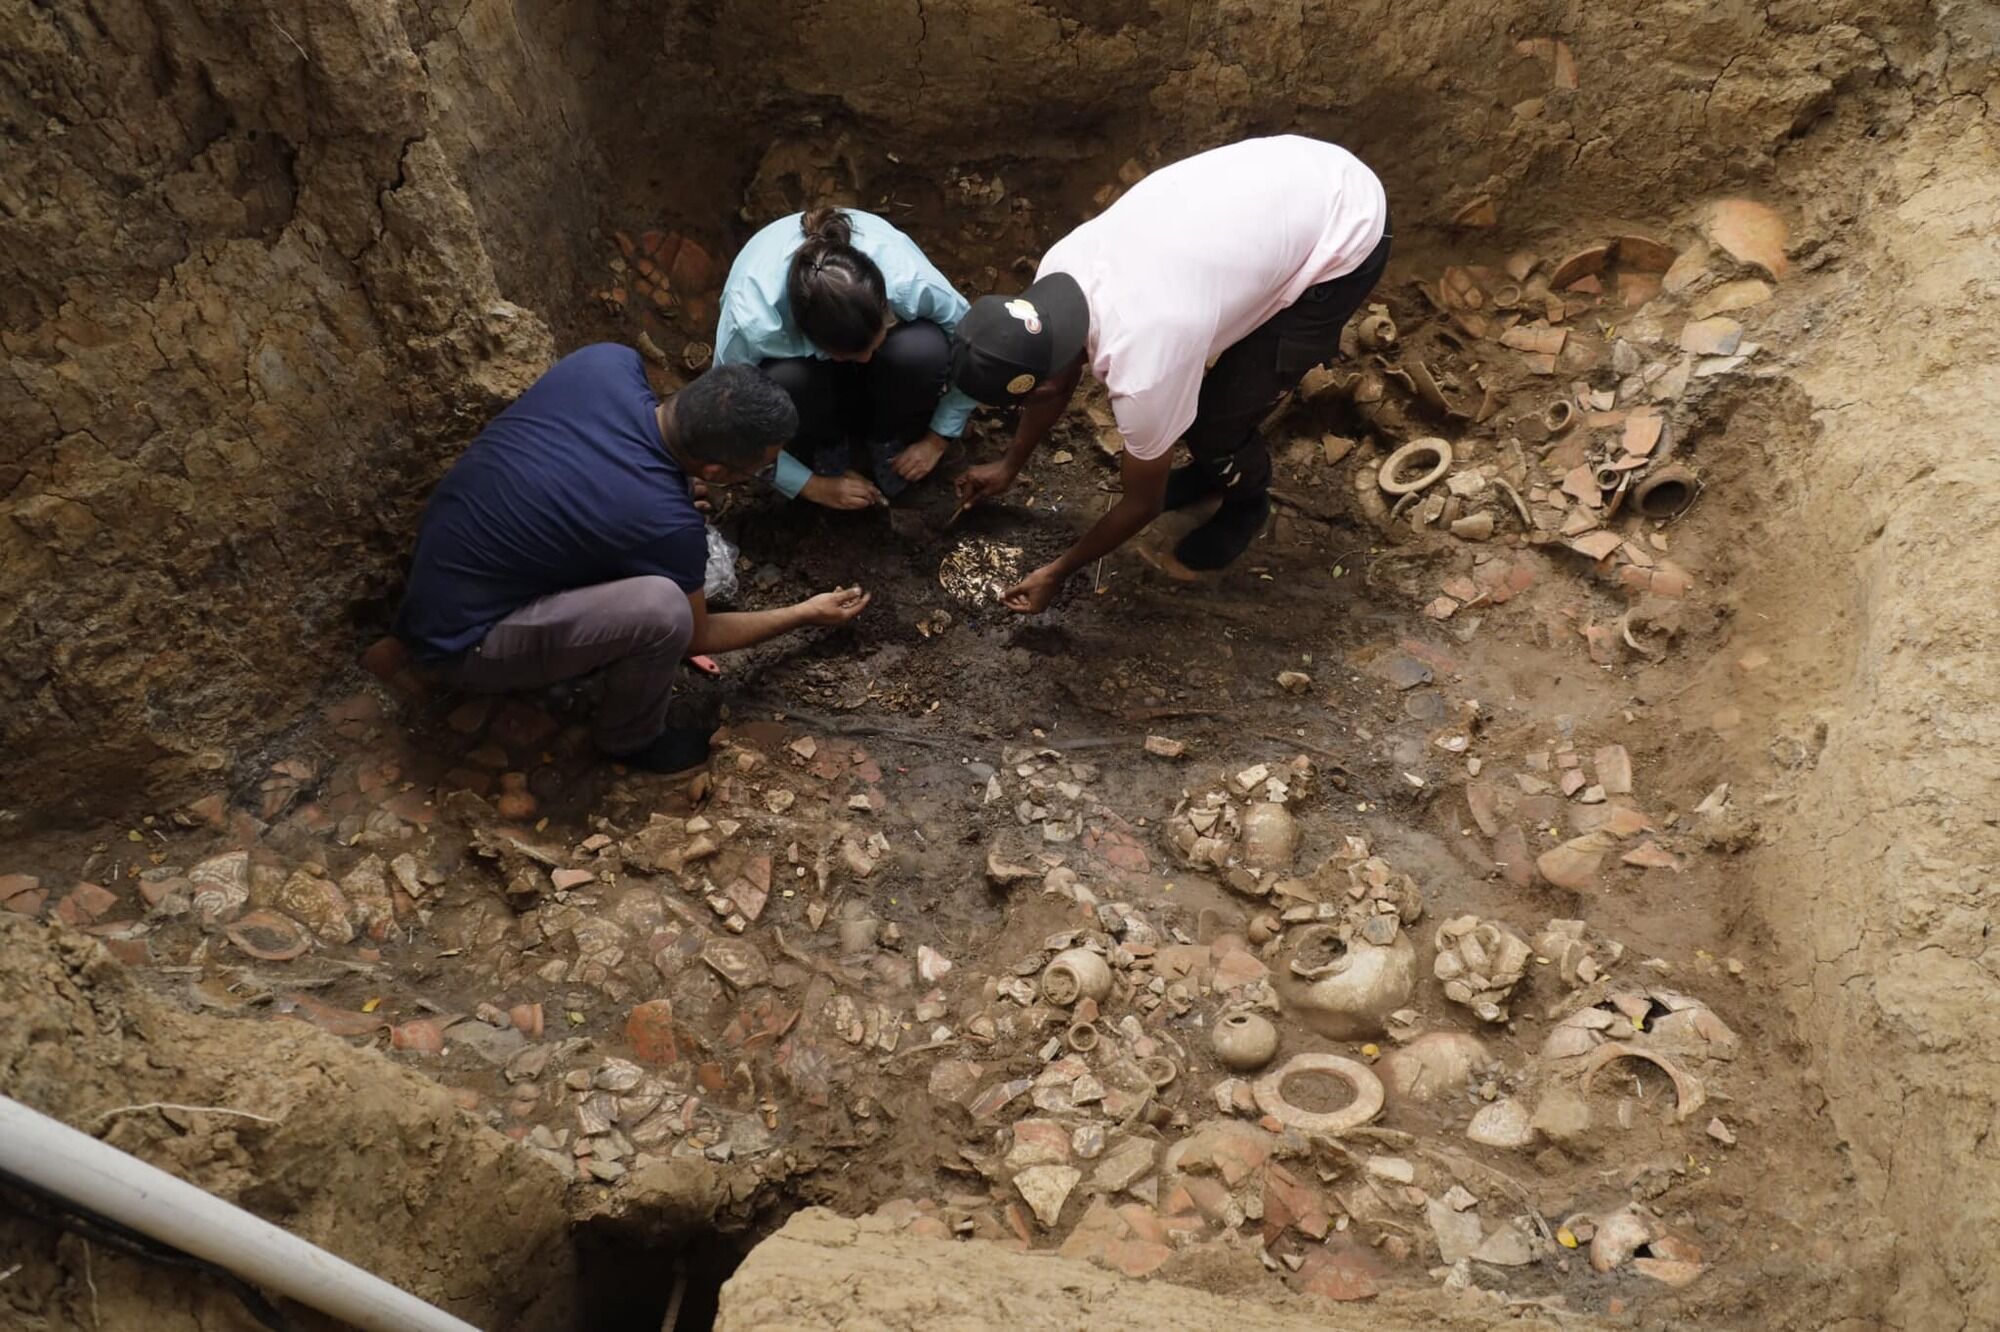 A 1200-year-old tomb of a lord filled with gold was unearthed in Panama (photo)